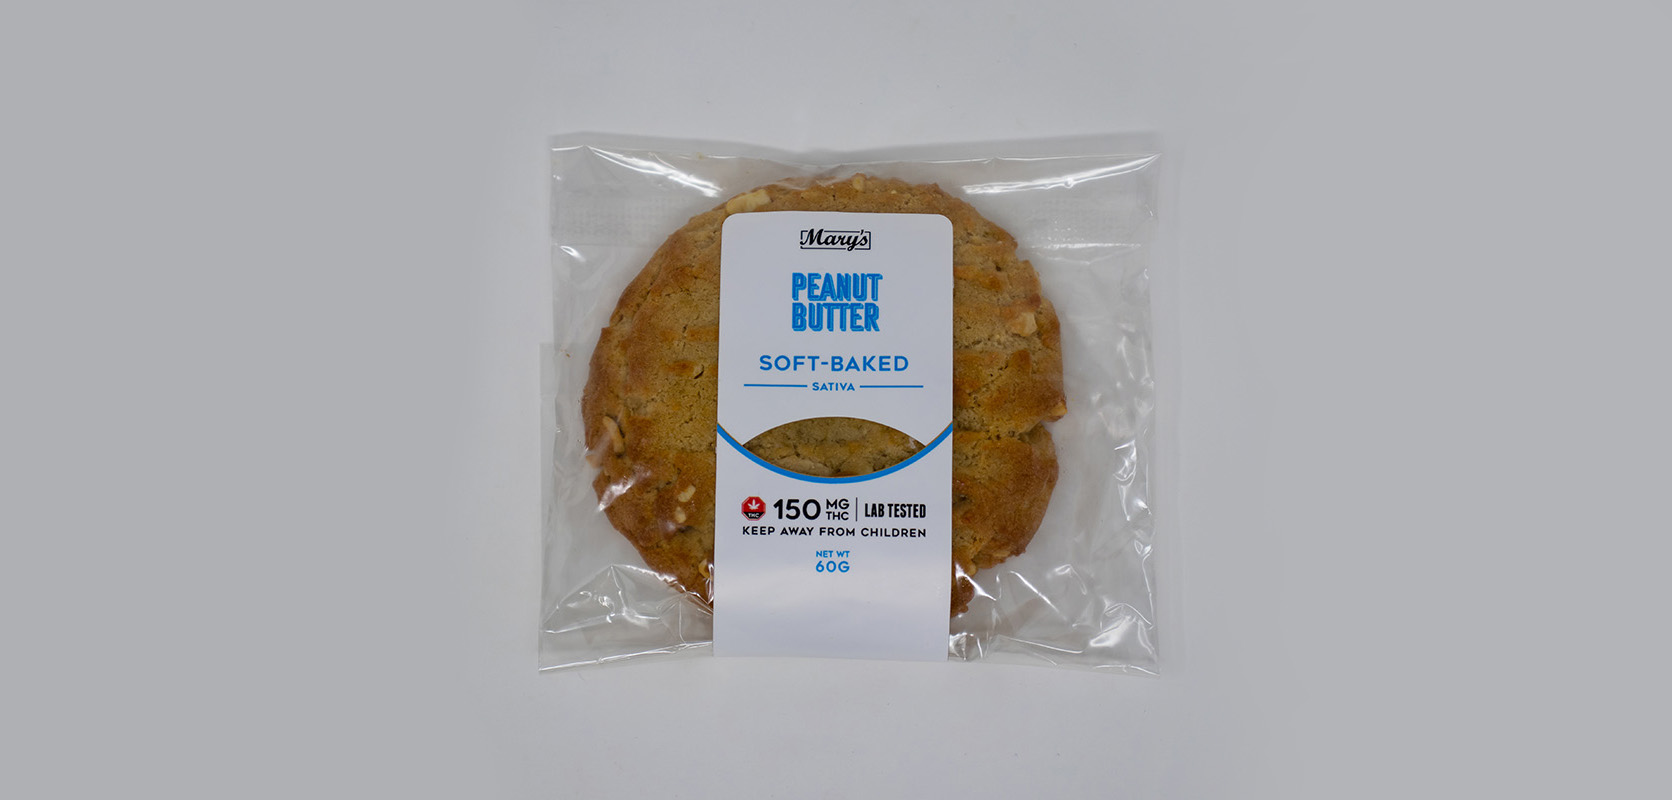 Mary's Medibles Peanut Butter Cookies marijuana edibles at online dispensary Low Price Bud. weed dispensary for cheapweed online in Canada. 